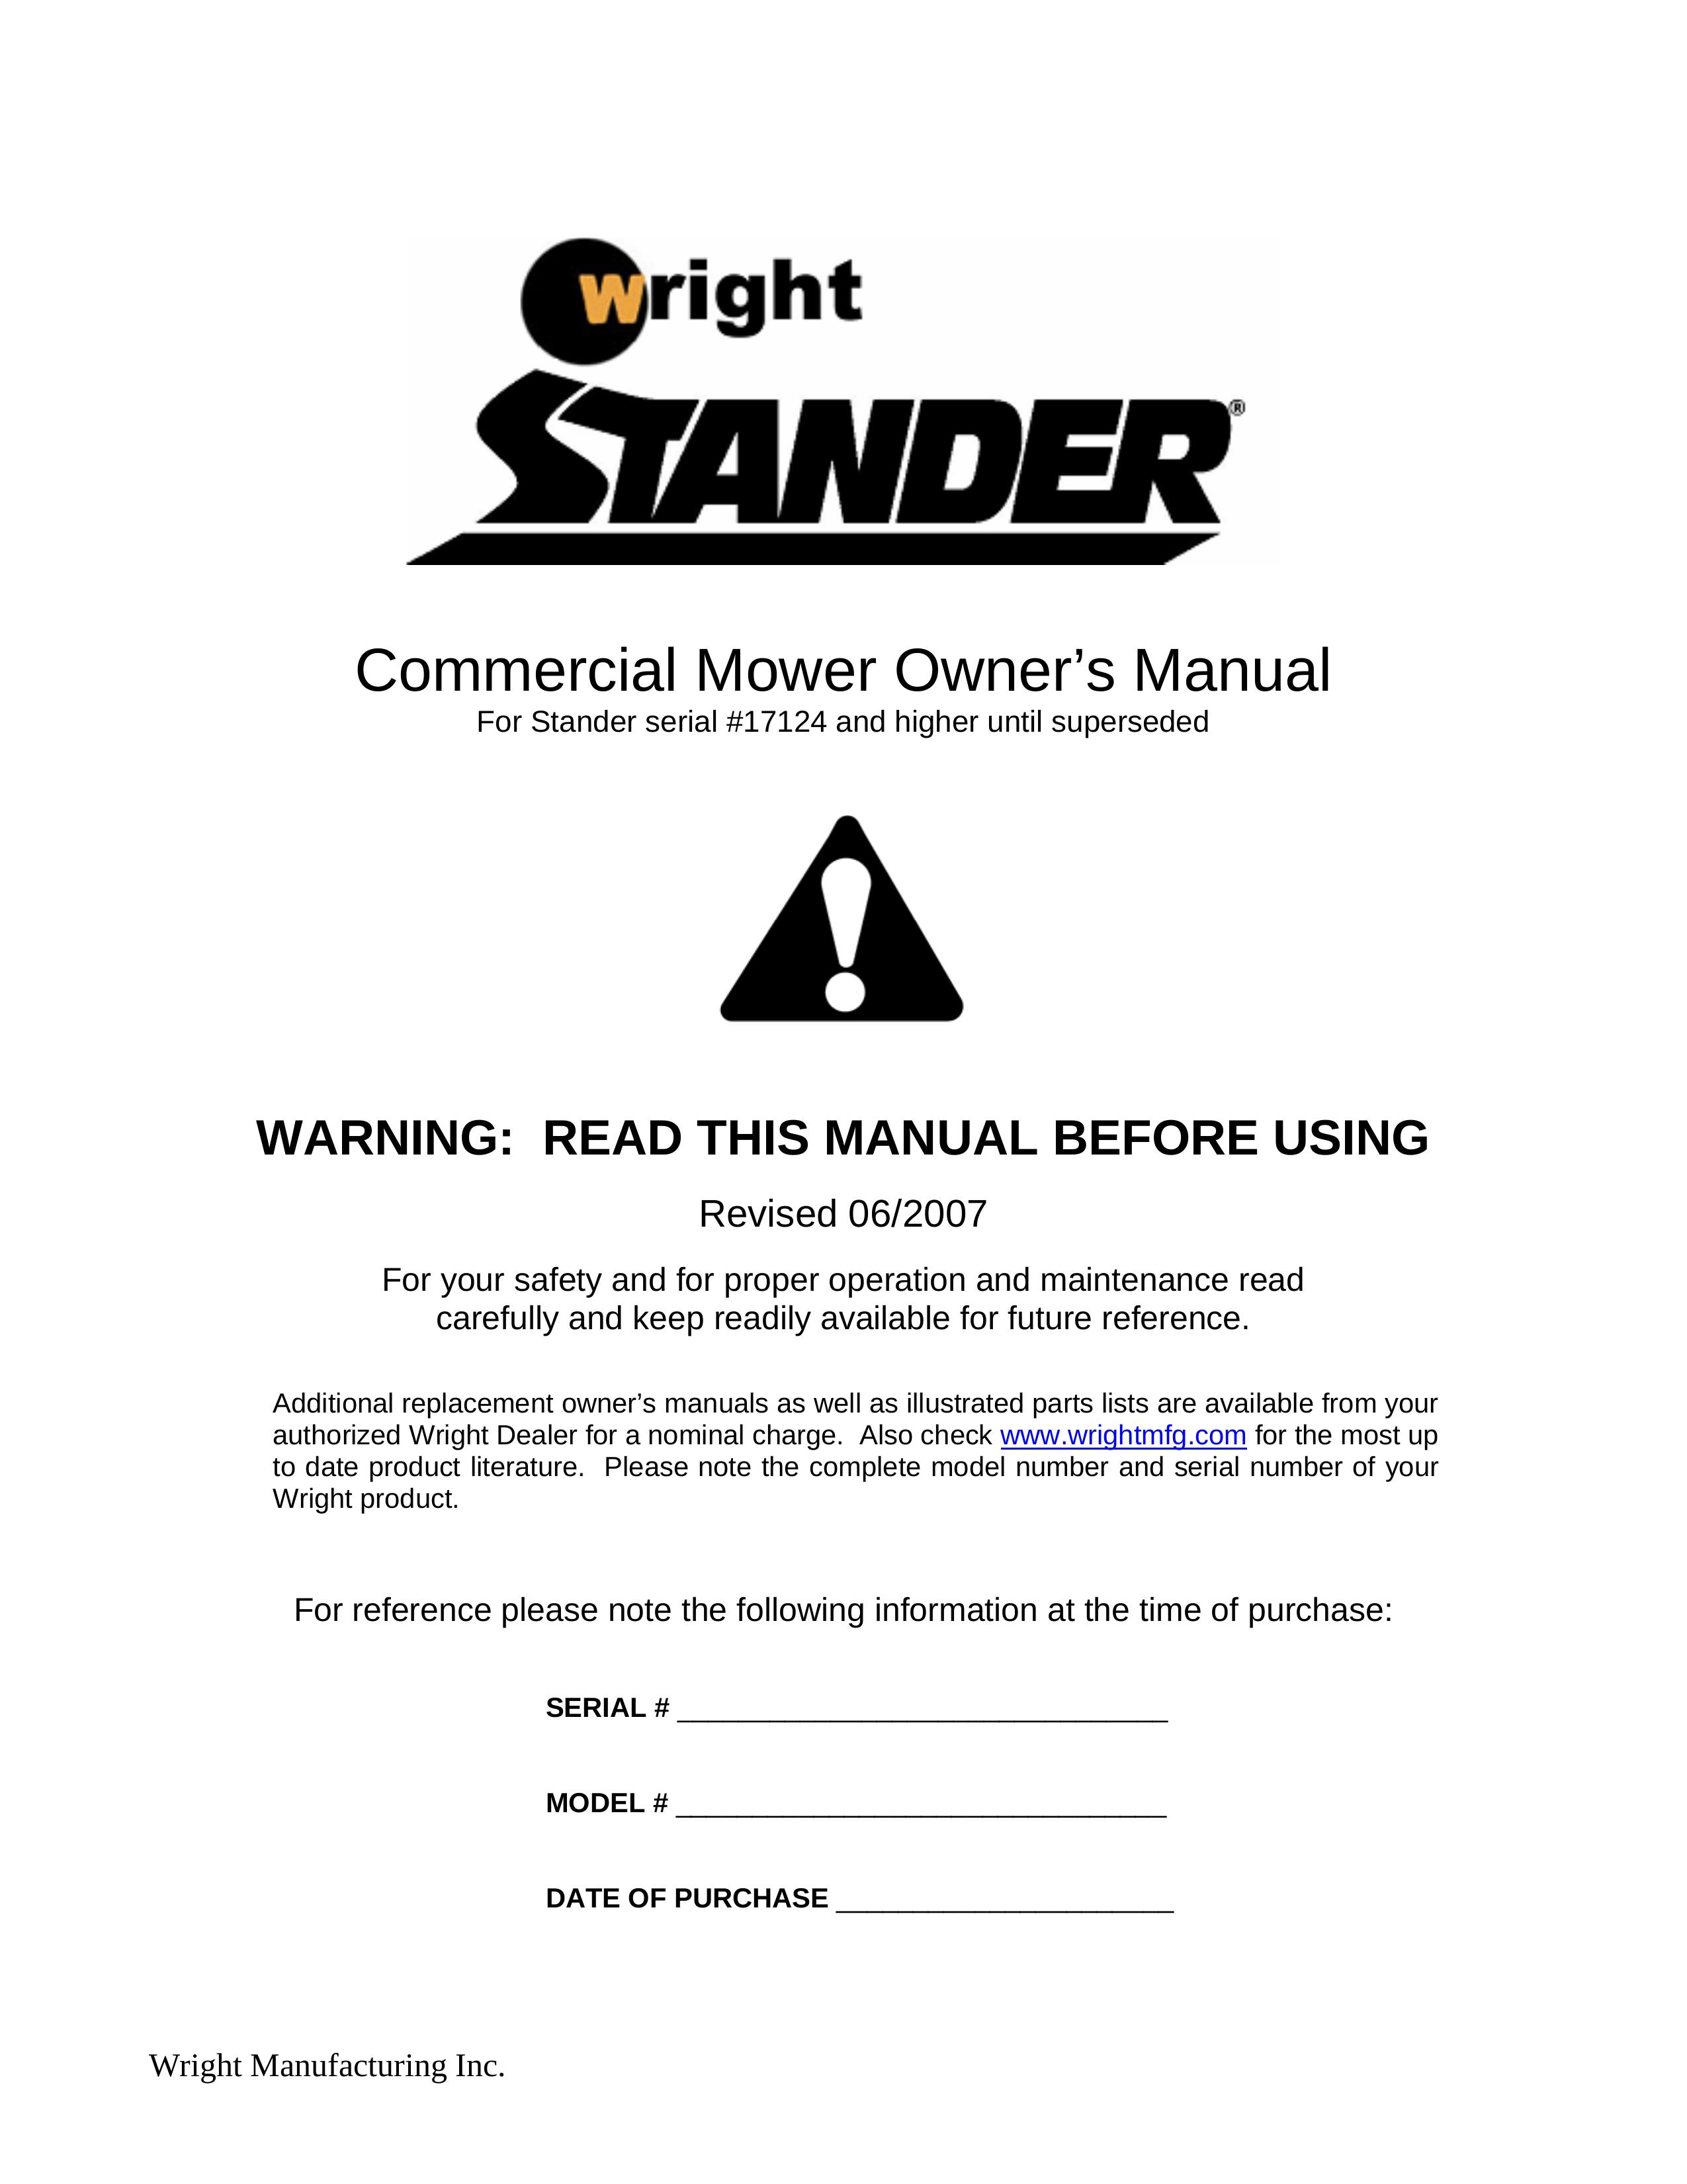 Wright Manufacturing Commercial Mower Lawn Mower User Manual